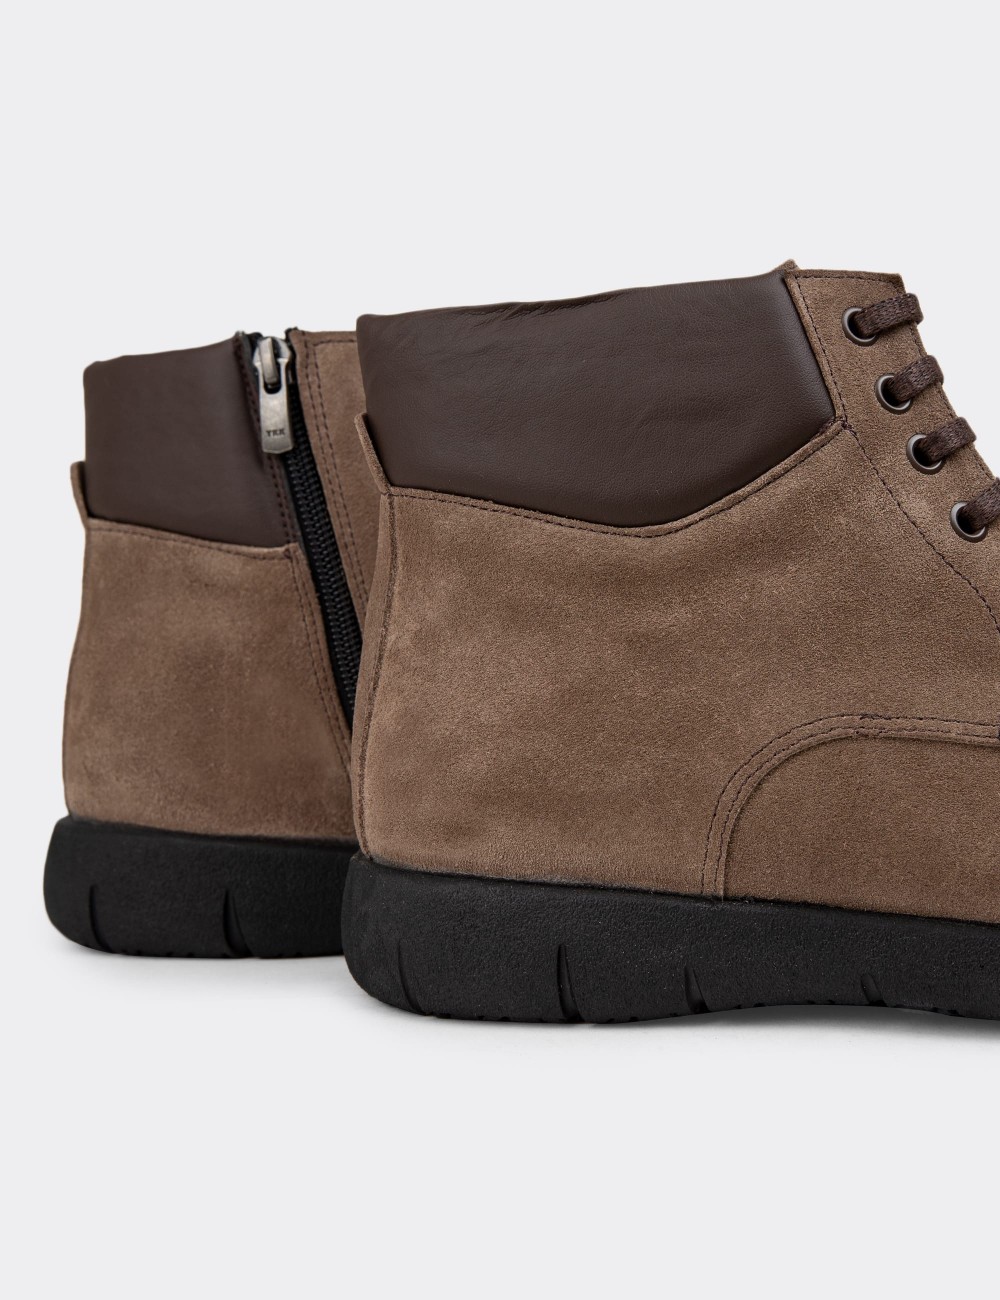 Sandstone Suede Leather Boots - 01929MVZNC01